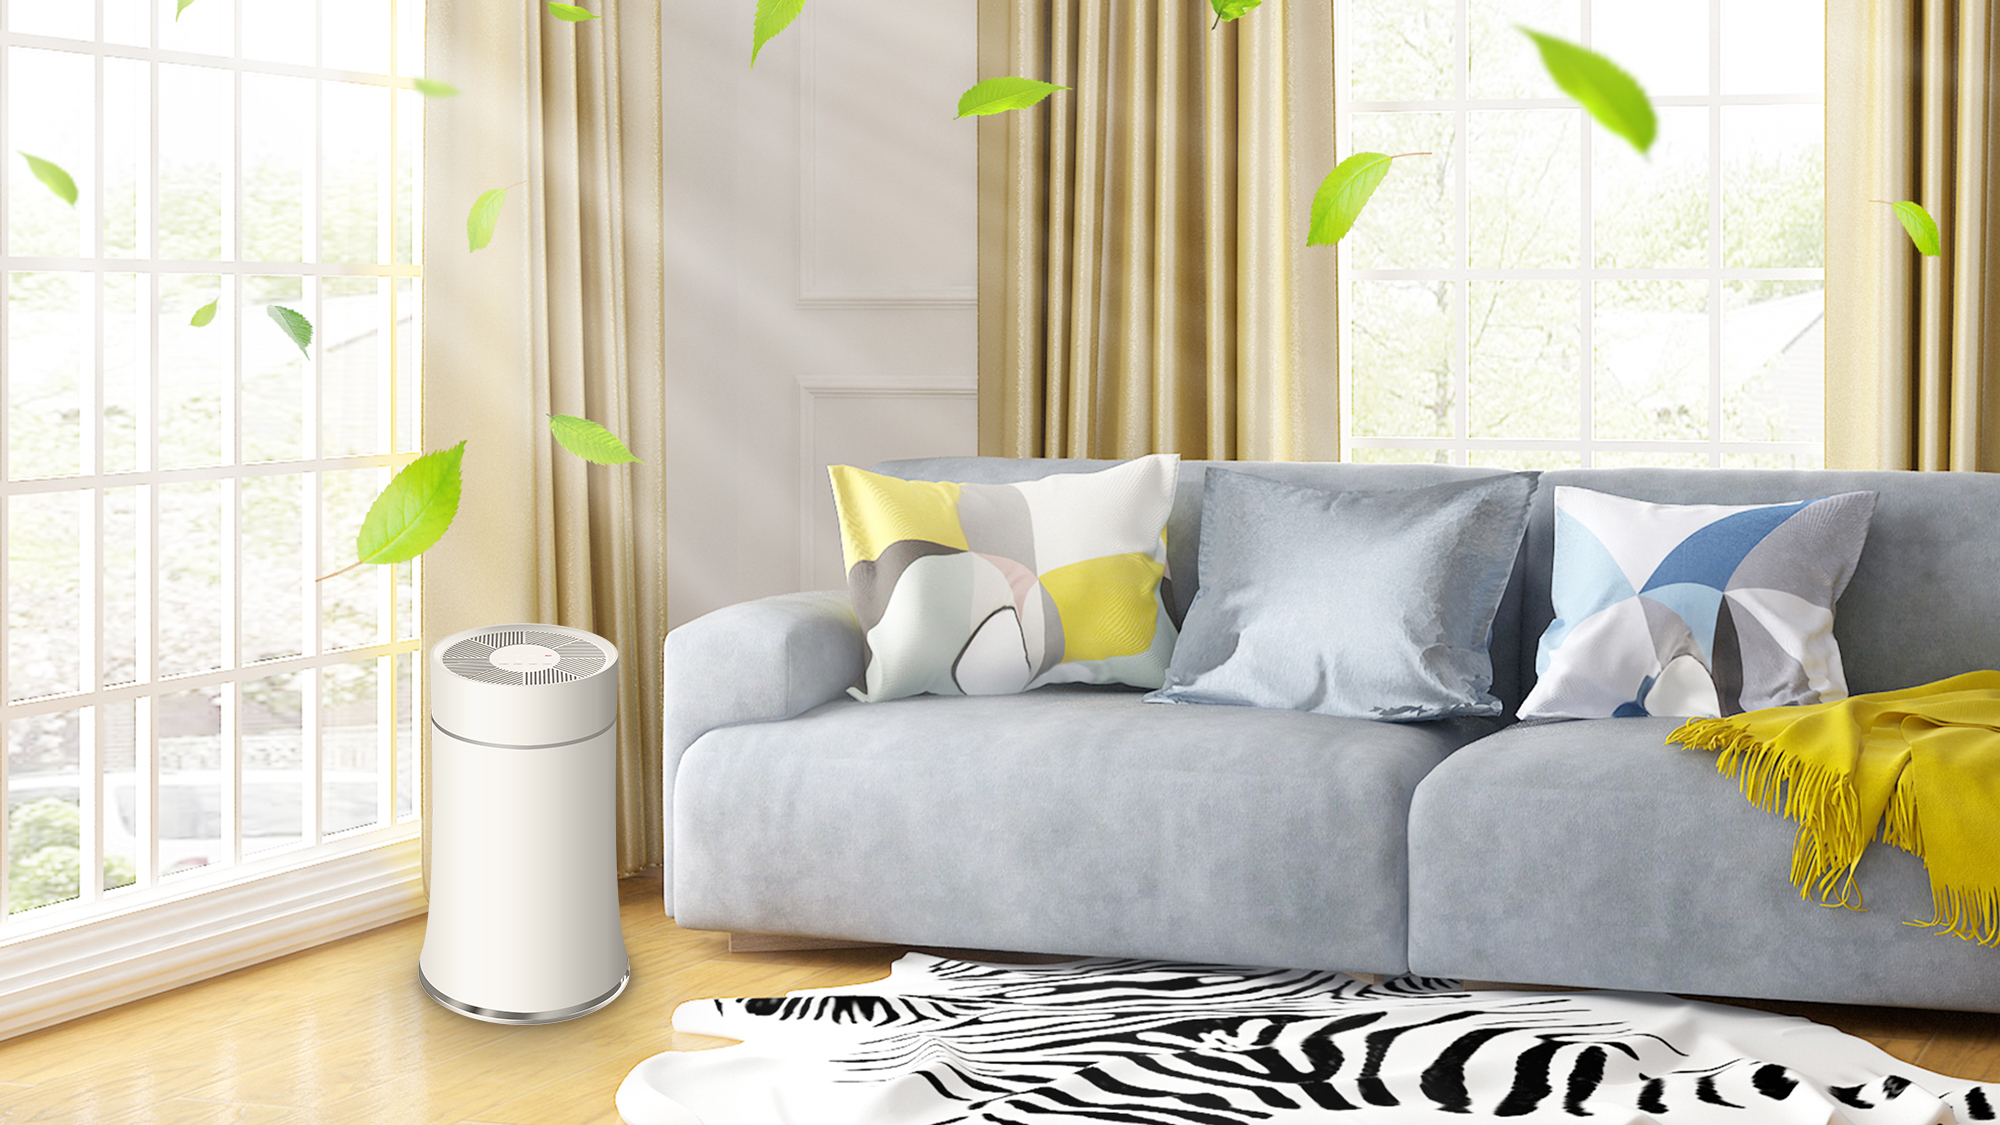 https://www.leeyoroto.com/c12-air-purifiers-that-focus-on-your-personal-reathing-product/